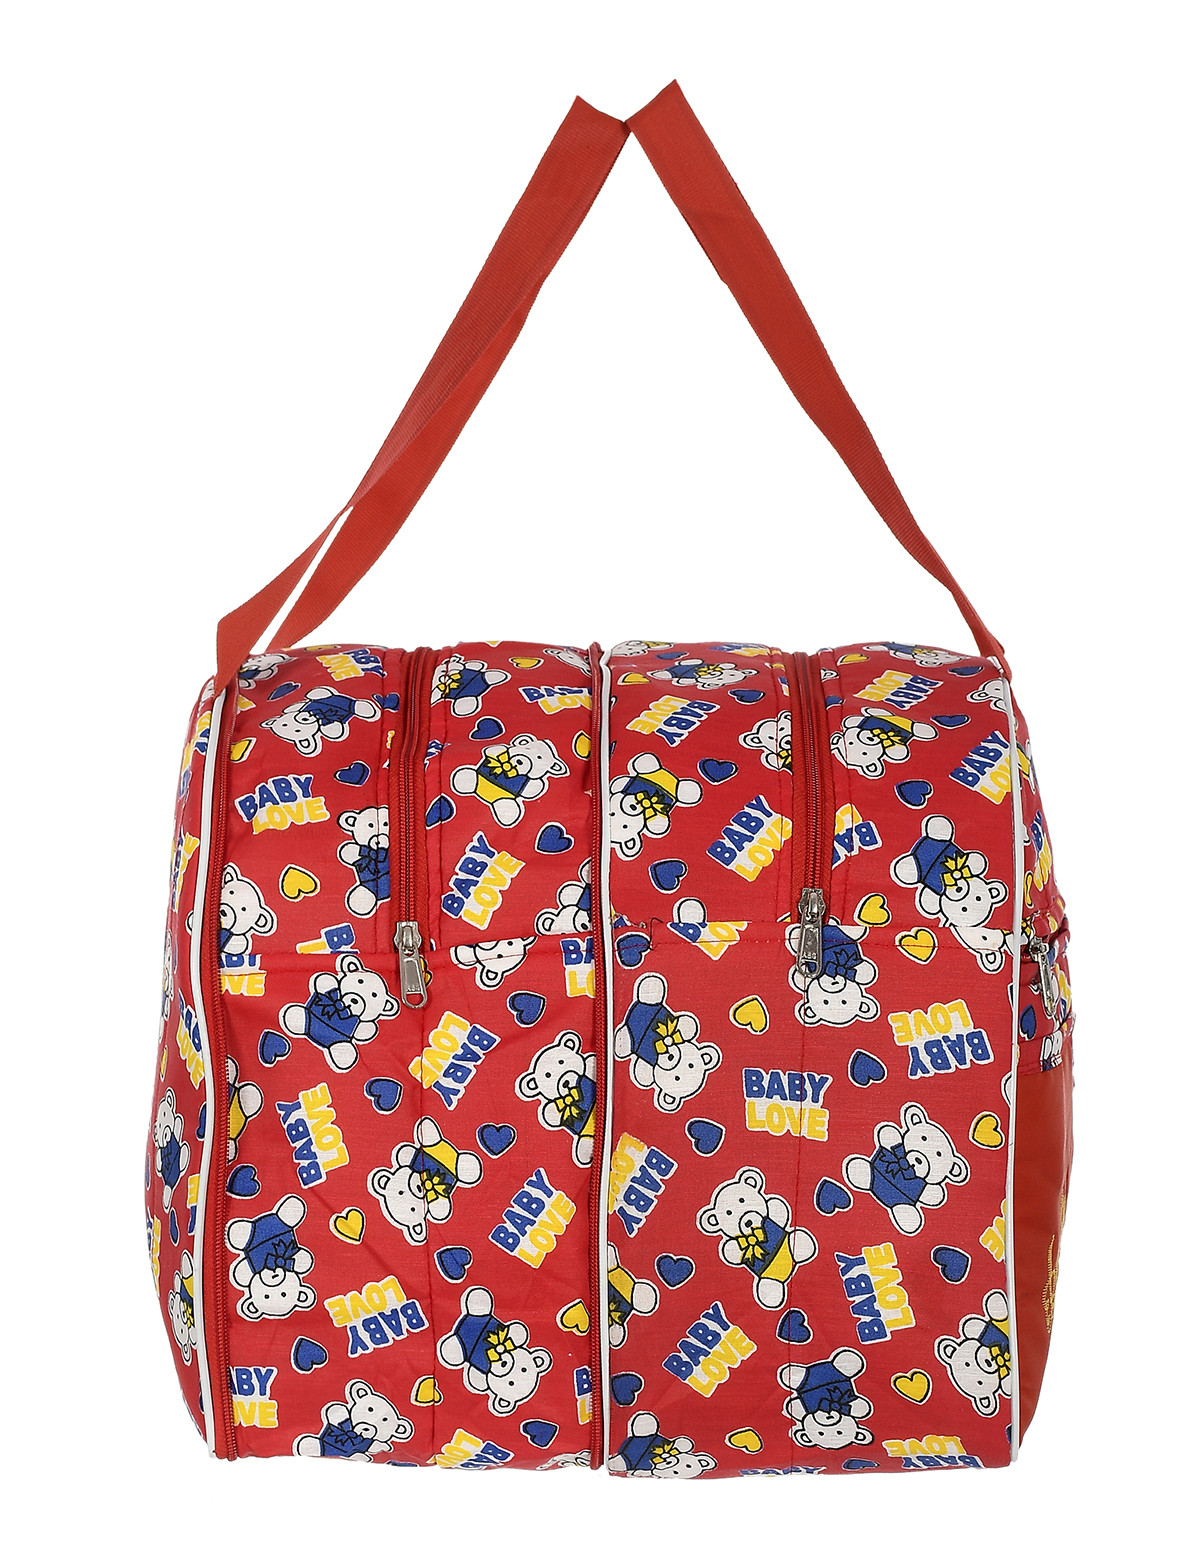 Kuber Industries Cotton Multiuses Teddy Print Mothers Bag/Diapers Bags With Handle For Traveling & Storing (Red)